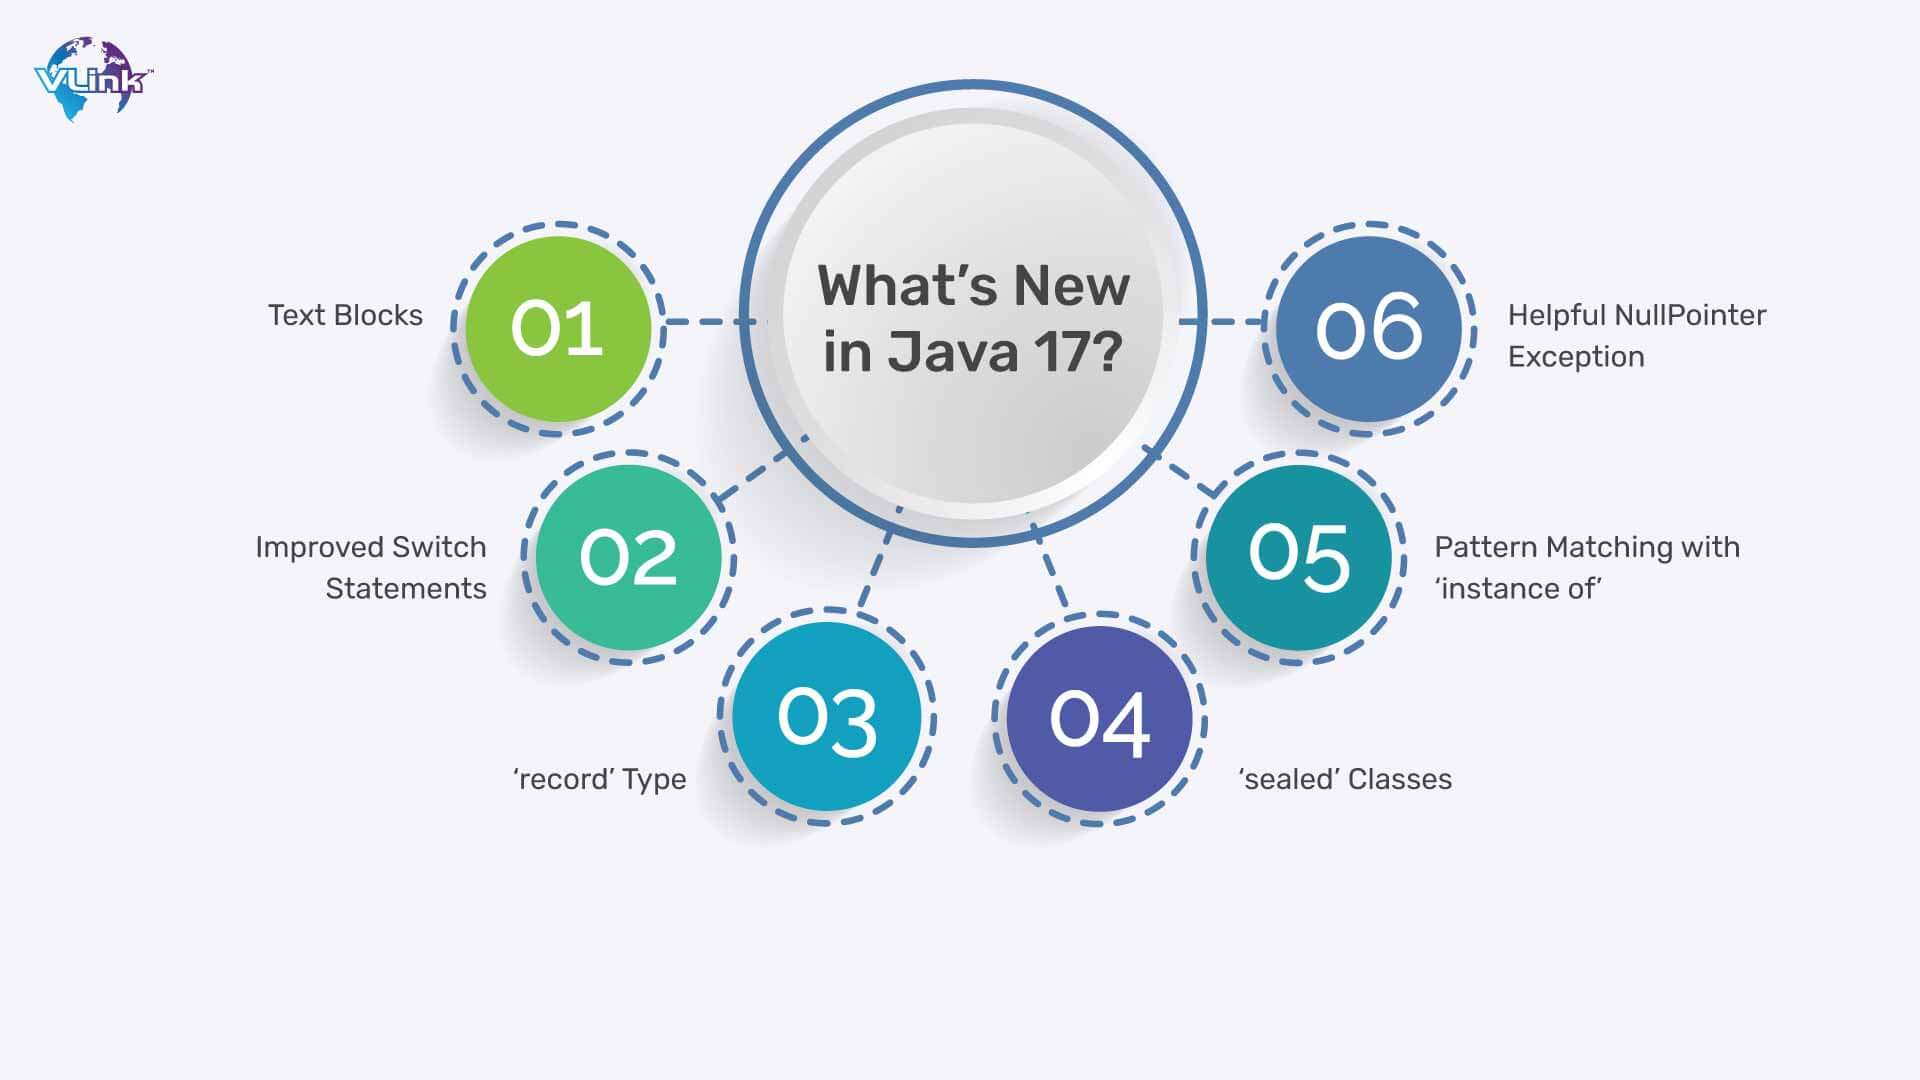 What's New in Java 17